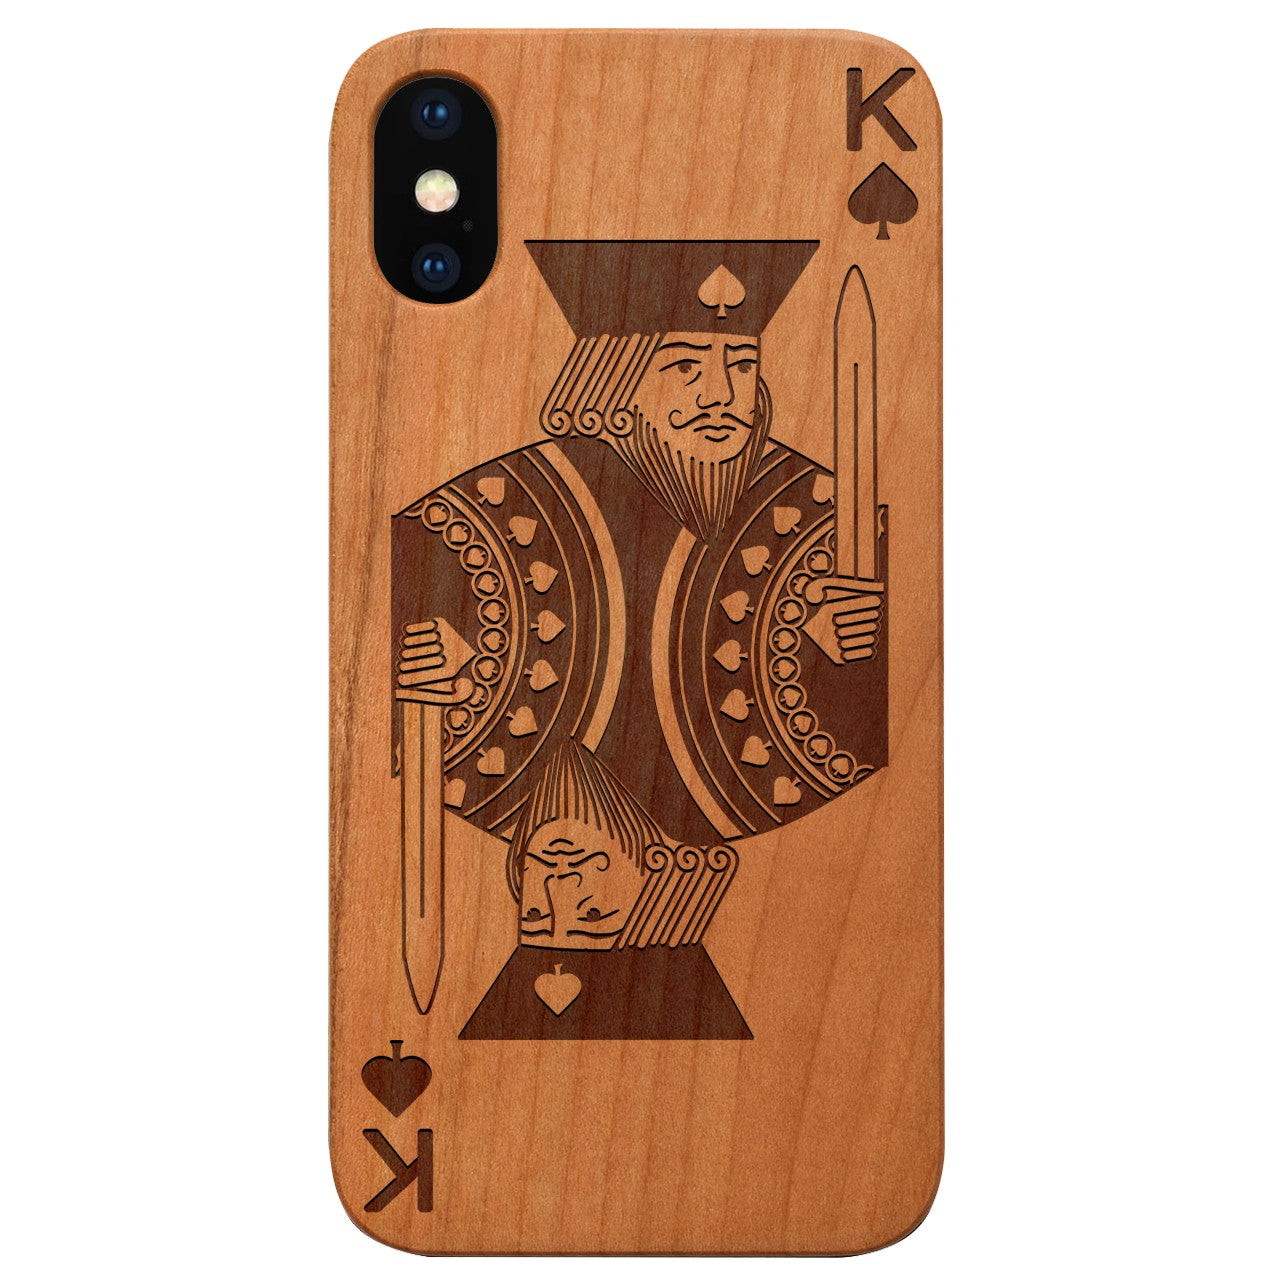  King of Spades - Engraved - Wooden Phone Case - IPhone 13 Models